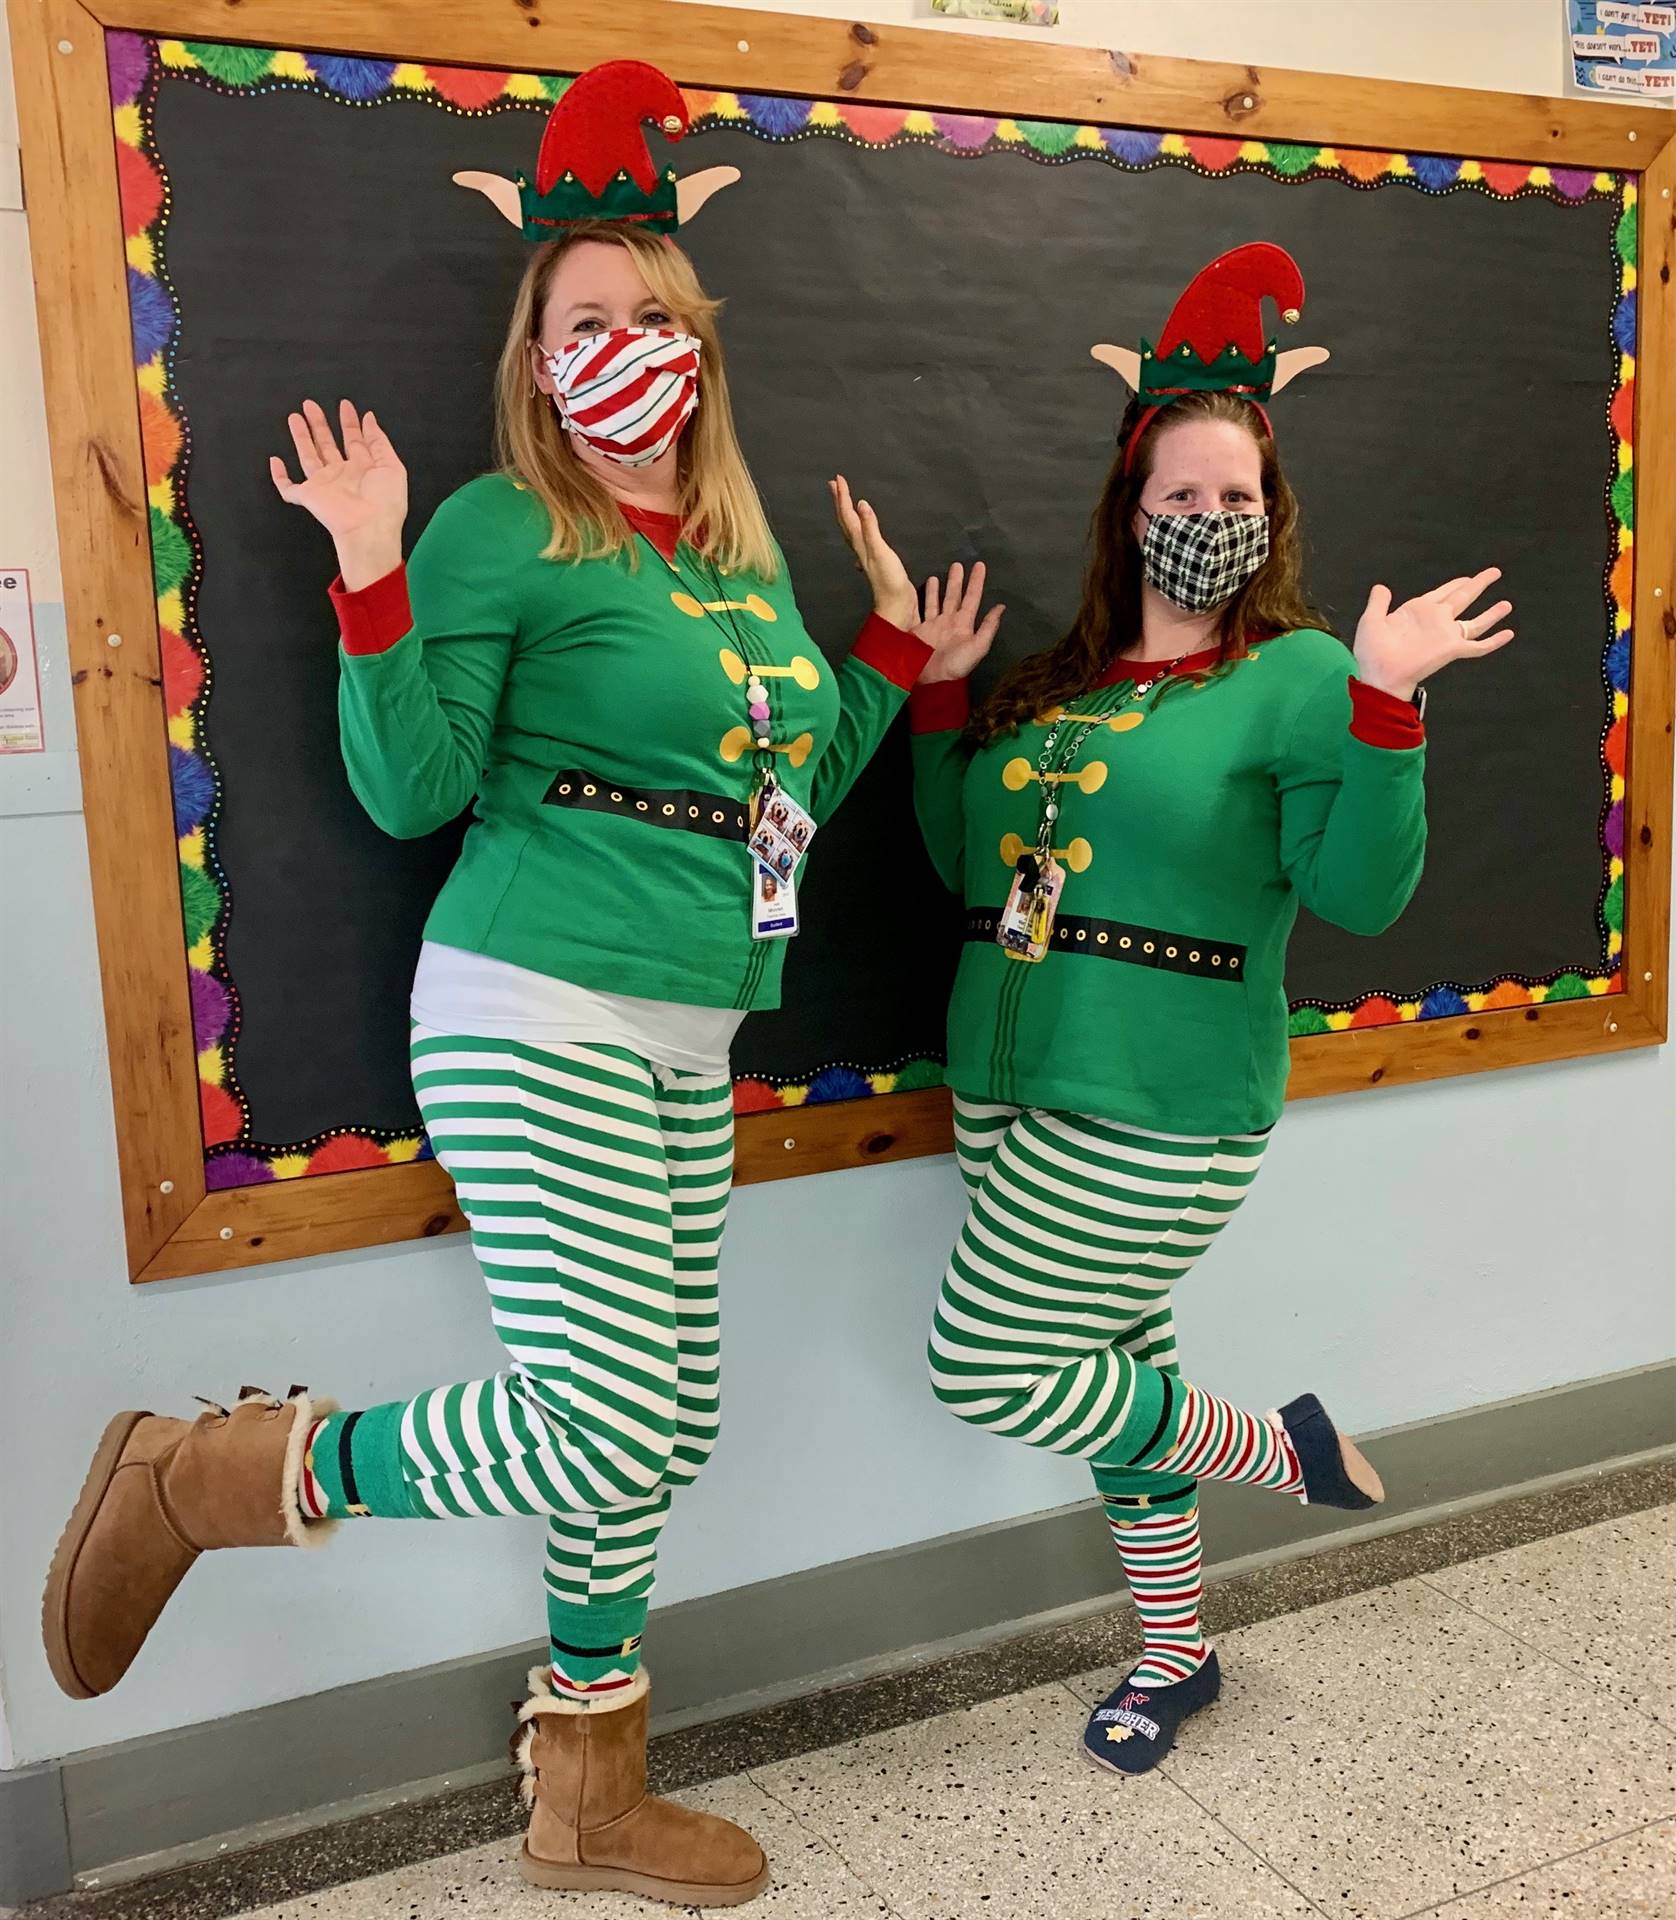 2 Elves being silly.